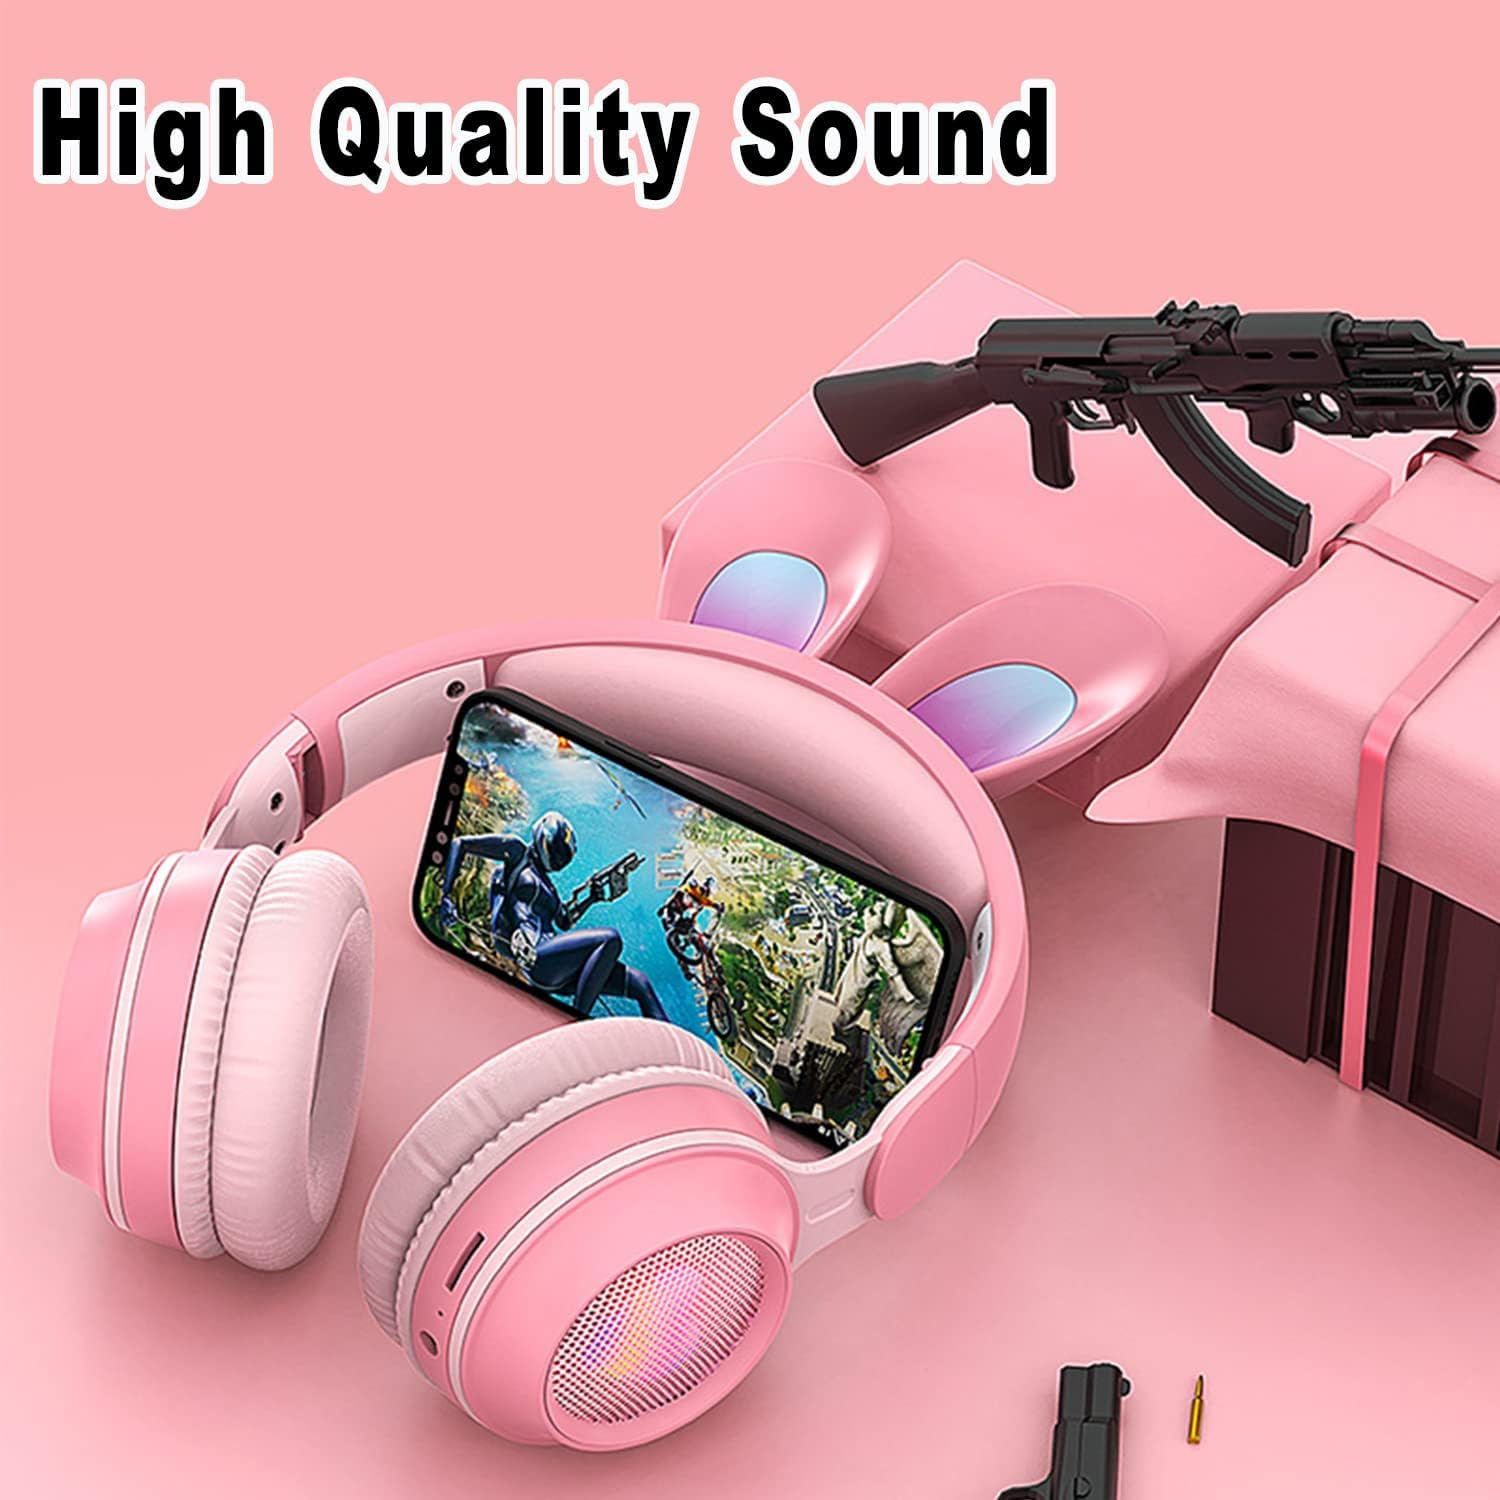 Excefore Over Ear Headphone, Bluetooth Headphones for Kids, Wireless Foldable Kids Headset with LED Rabbit Ears Removeable Noise Cancelling Microphone for Girls on School, Travel, Gaming (Pink)